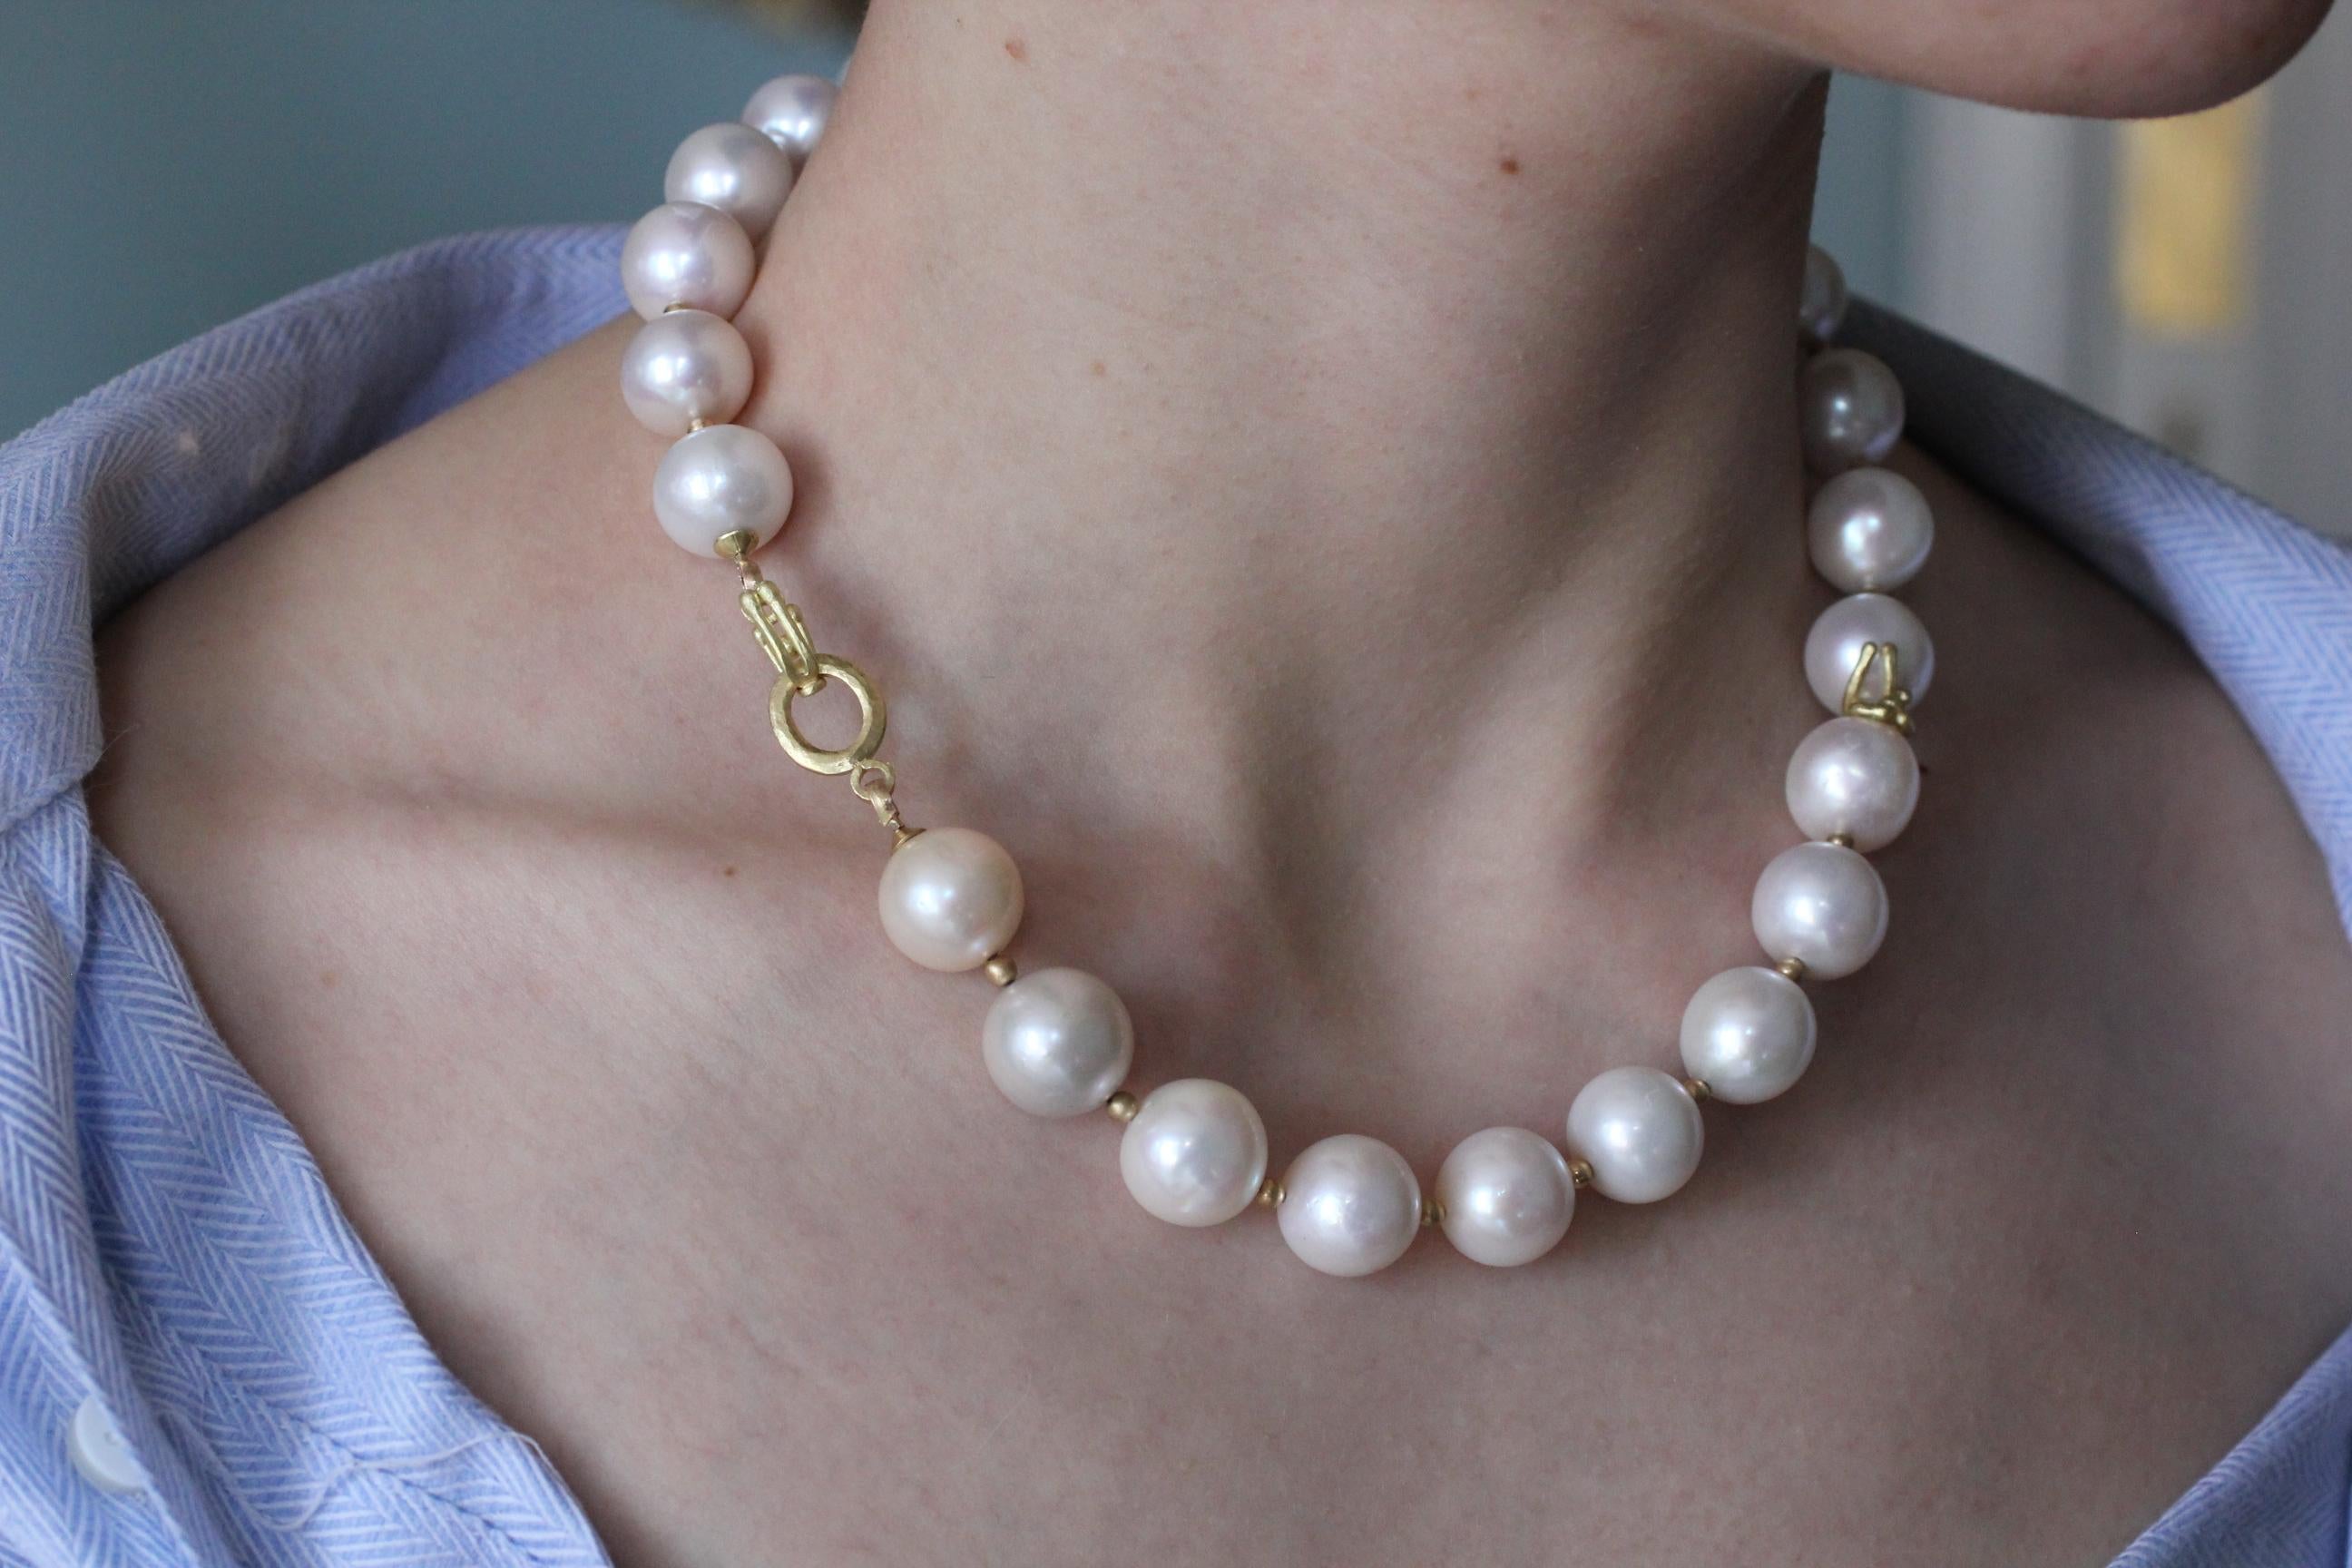 The Light. This white large cultured pearl beaded handmade choker necklace is elegant in its clean beautiful versatility. Great as a gift for a Bride, a Wedding, Christmas or any other holiday occasion. Beautiful lustrous white mostly round pearls